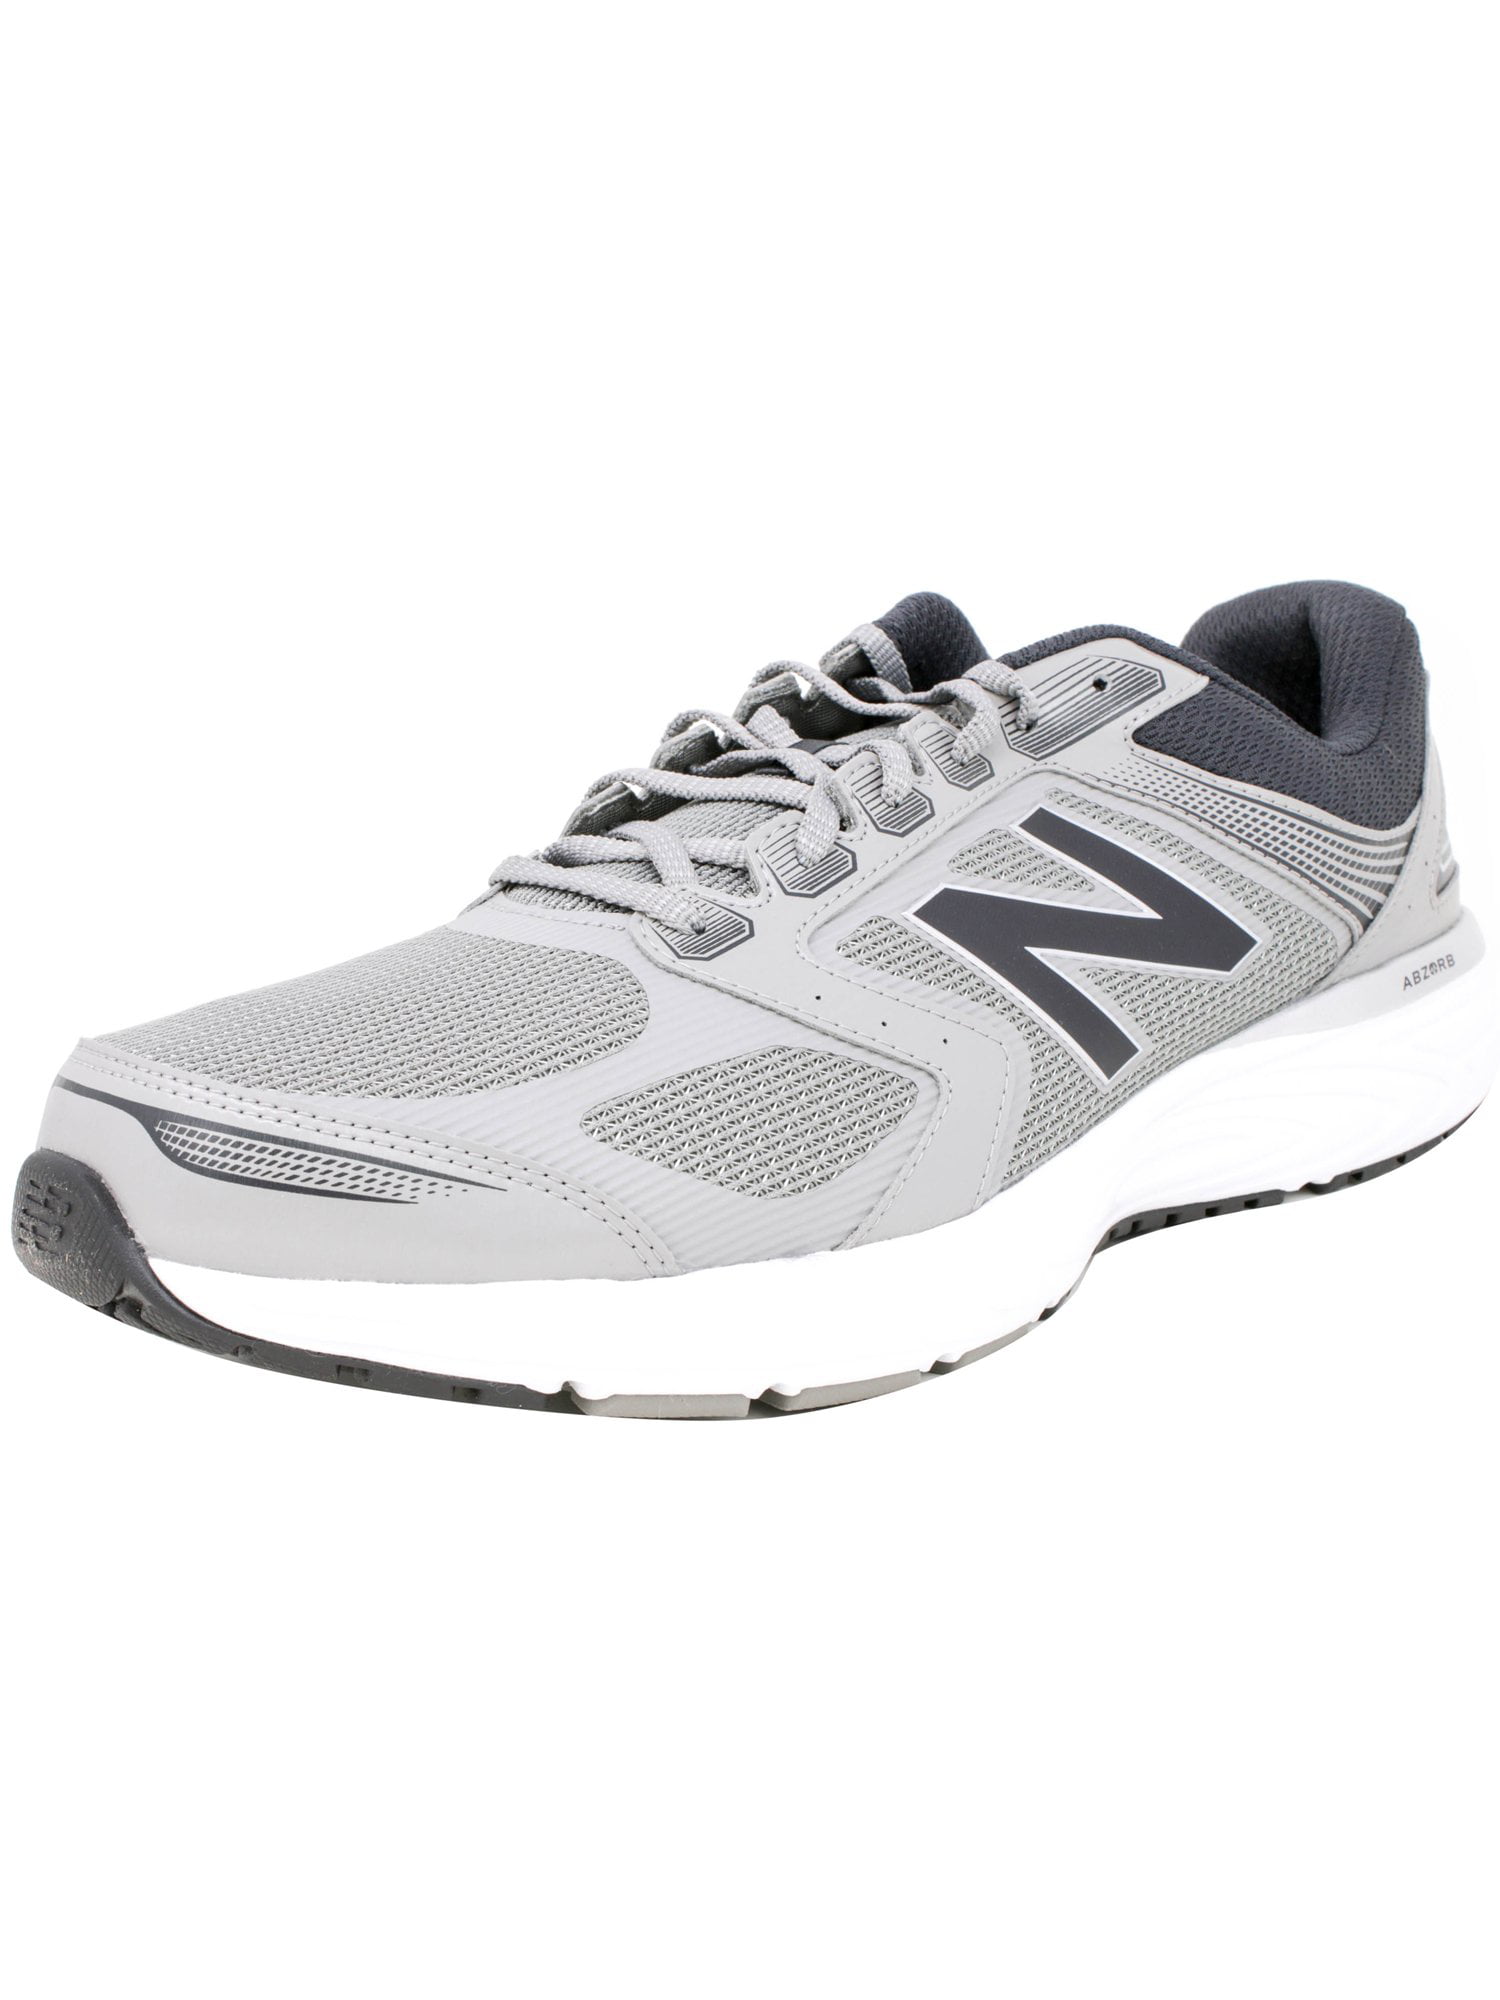 M560 Cm7 Ankle-High Running Shoe - 15M 